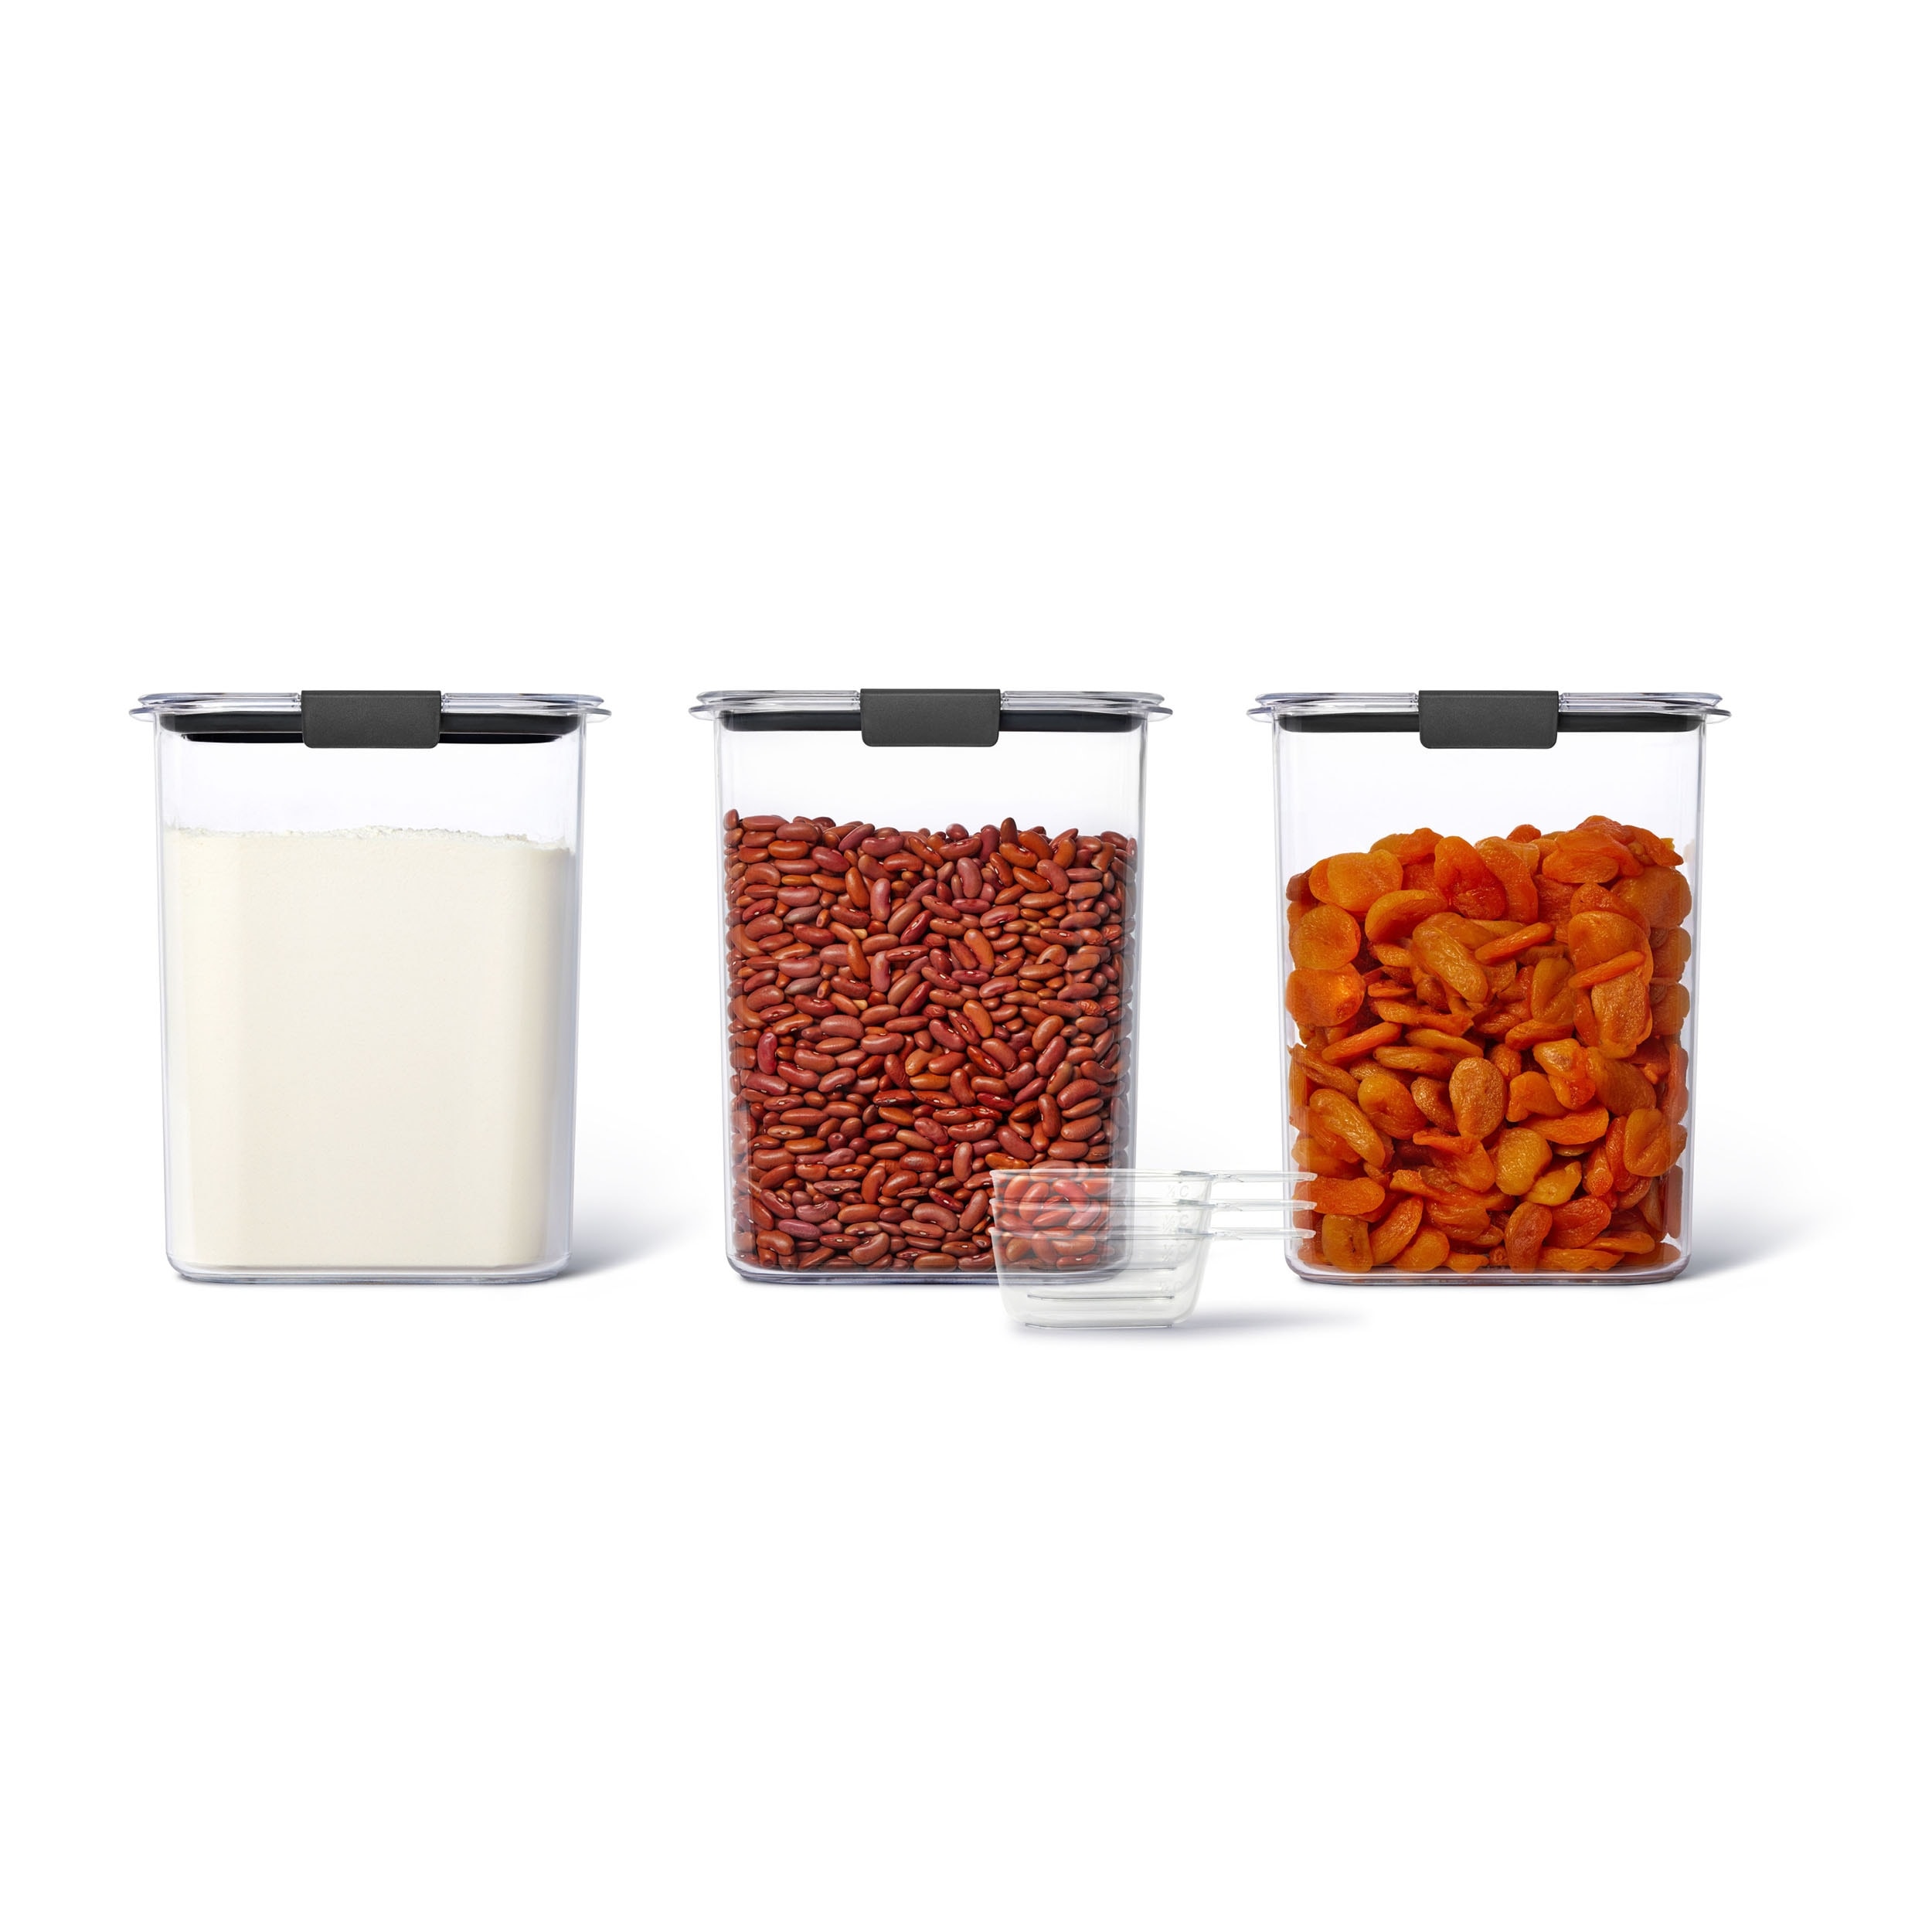 https://ak1.ostkcdn.com/images/products/is/images/direct/44ec6c8fa396eea041be49dd0368d106407a4451/Rubbermaid-Brilliance-Pantry-3-Piece-Set%2C-Clear-and-Airtight-Food-and-Pantry-Storage-Containers.jpg